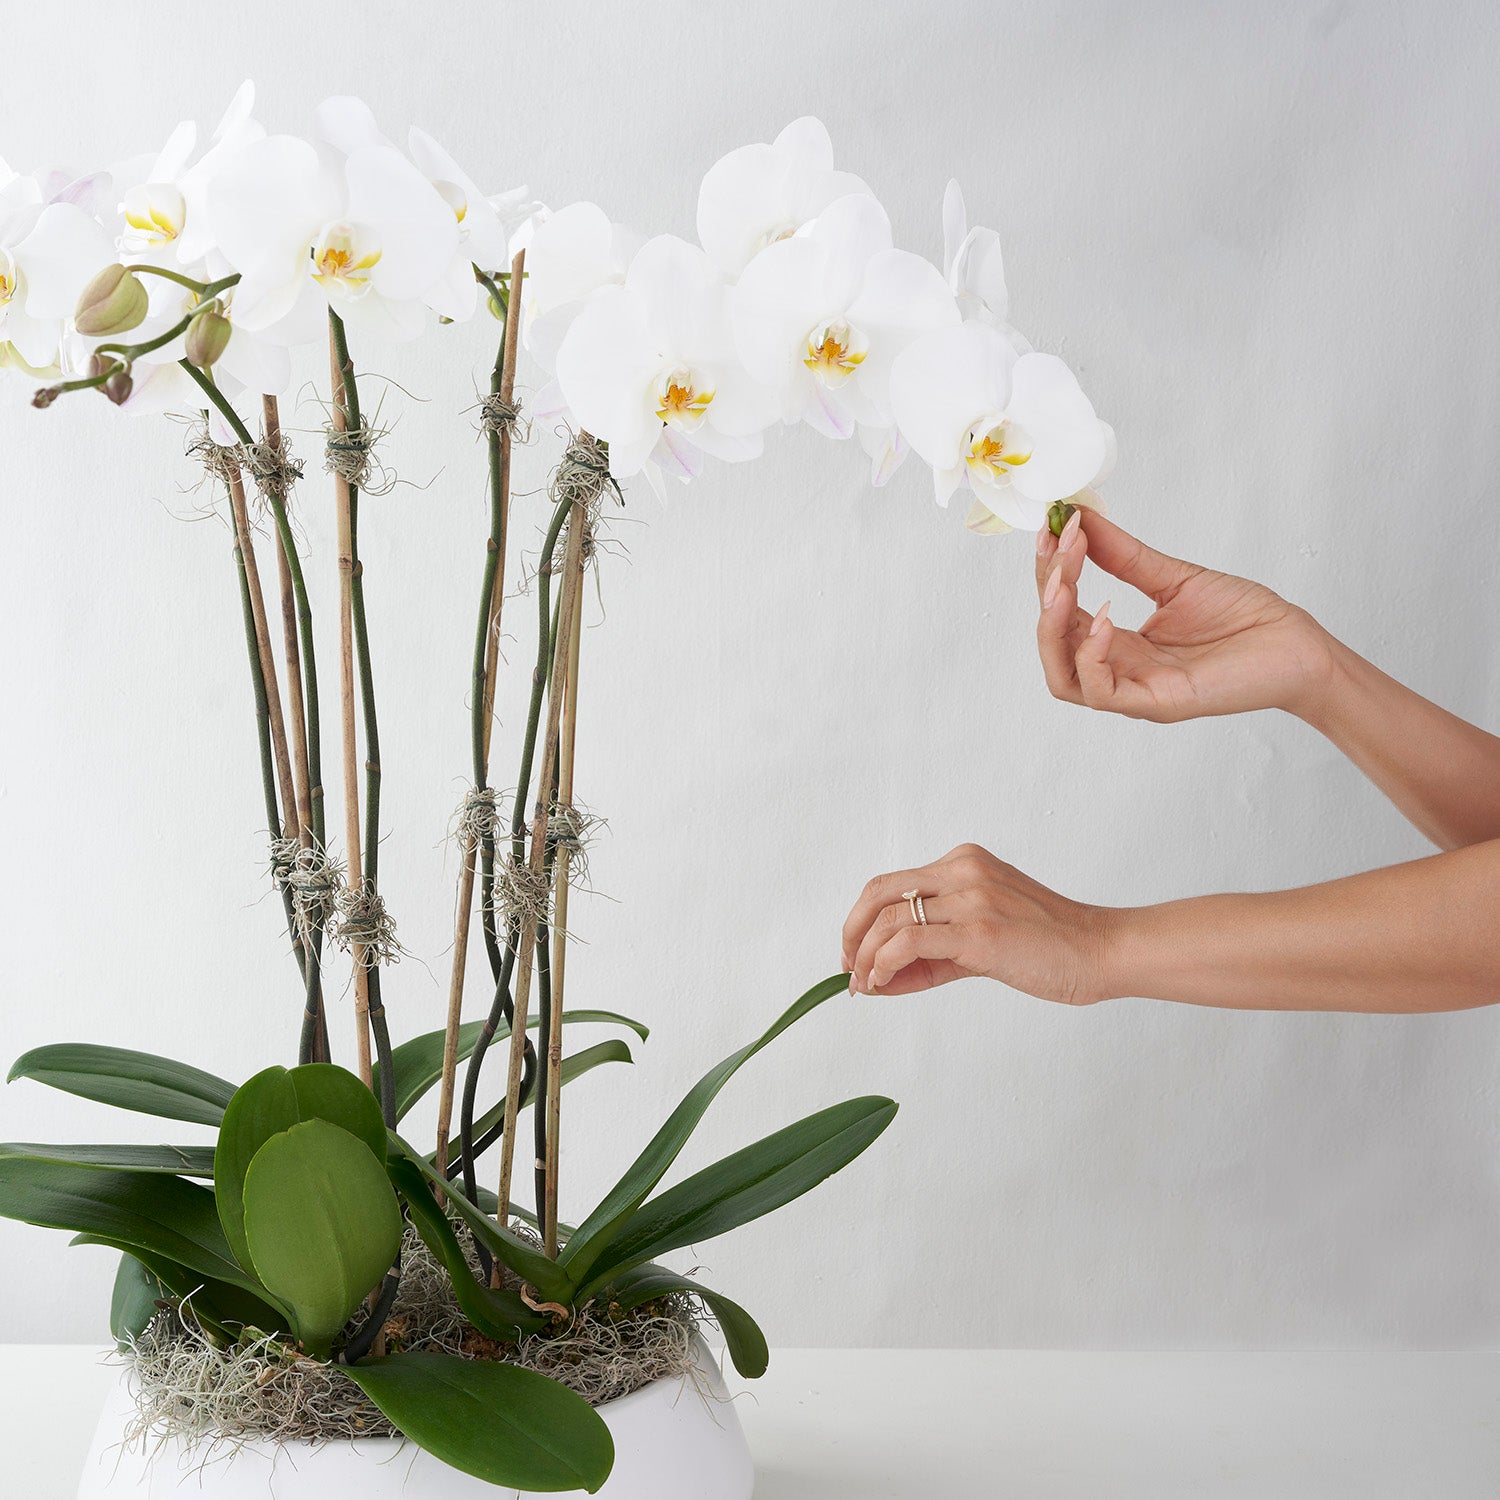 A set of hands touching arrangement of several white phalaenopsis orchid plants in white conatainer on white background.